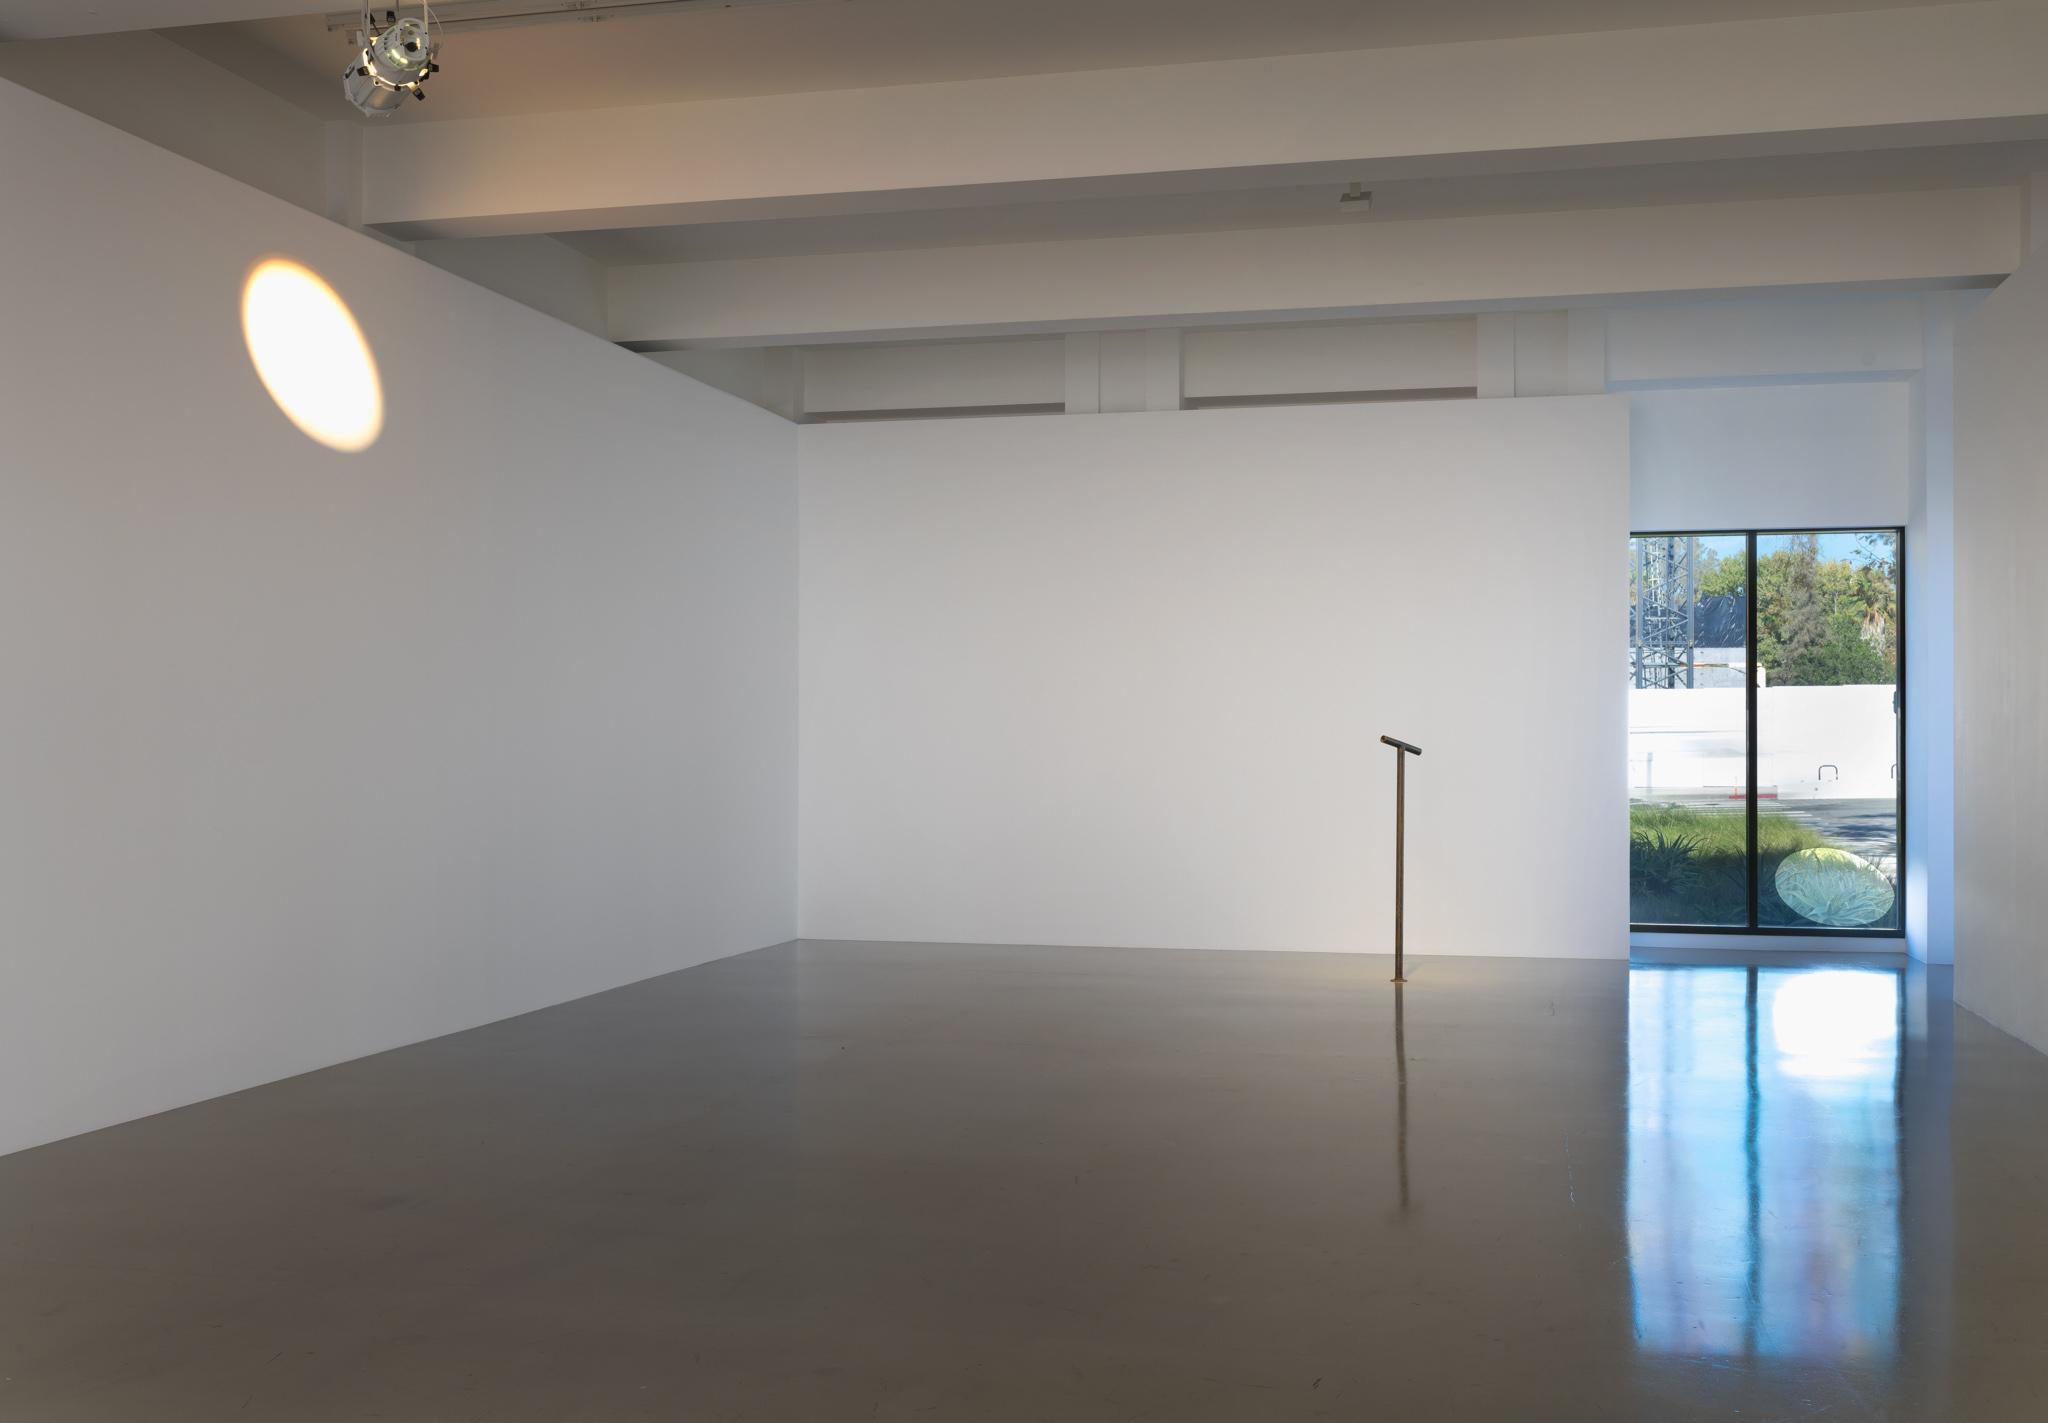 An exhibition space with a Locator in the center with an ellipse of light on one wall and a circular cutout over a window